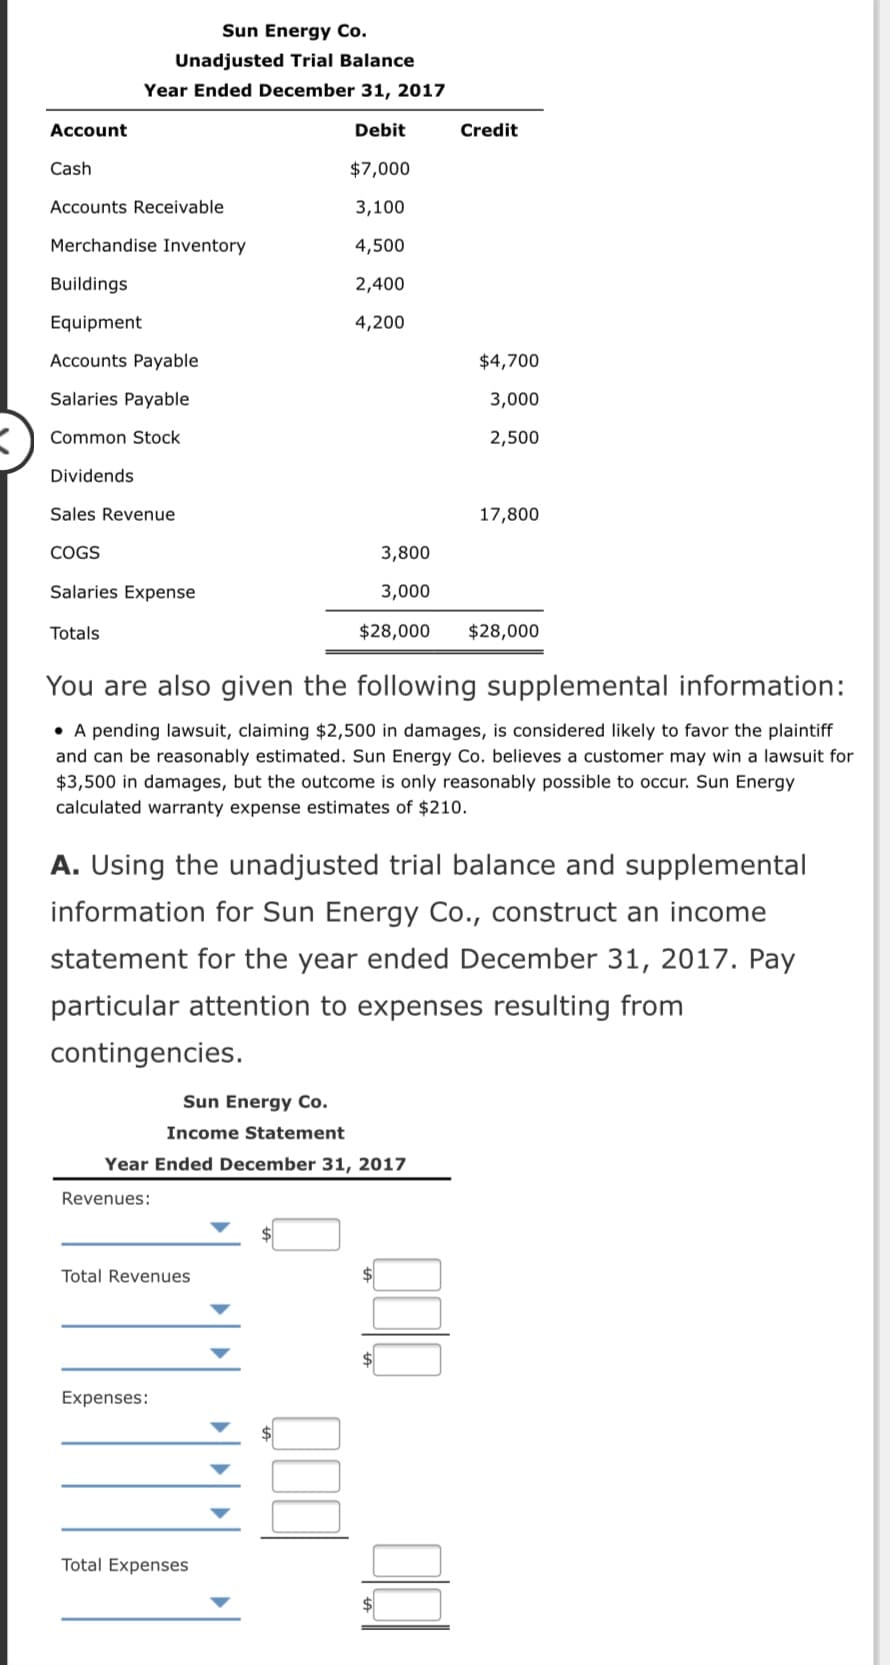 Sun Energy Co.
Unadjusted Trial Balance
Year Ended December 31, 2017
Account
Debit
Credit
Cash
$7,000
Accounts Receivable
3,100
Merchandise Inventory
4,500
Buildings
2,400
Equipment
4,200
Accounts Payable
$4,700
Salaries Payable
3,000
Common Stock
2,500
Dividends
Sales Revenue
17,800
COGS
3,800
Salaries Expense
3,000
Totals
$28,000
$28,000
You are also given the following supplemental information:
• A pending lawsuit, claiming $2,500 in damages, is considered likely to favor the plaintiff
and can be reasonably estimated. Sun Energy Co. believes a customer may win a lawsuit for
$3,500 in damages, but the outcome is only reasonably possible to occur. Sun Energy
calculated warranty expense estimates of $210.
A. Using the unadjusted trial balance and supplemental
information for Sun Energy Co., construct an income
statement for the year ended December 31, 2017. Pay
particular attention to expenses resulting from
contingencies.
Sun Energy Co.
Income Statement
Year Ended December 31, 2017
Revenues:
Total Revenues
Expenses:
Total Expenses
